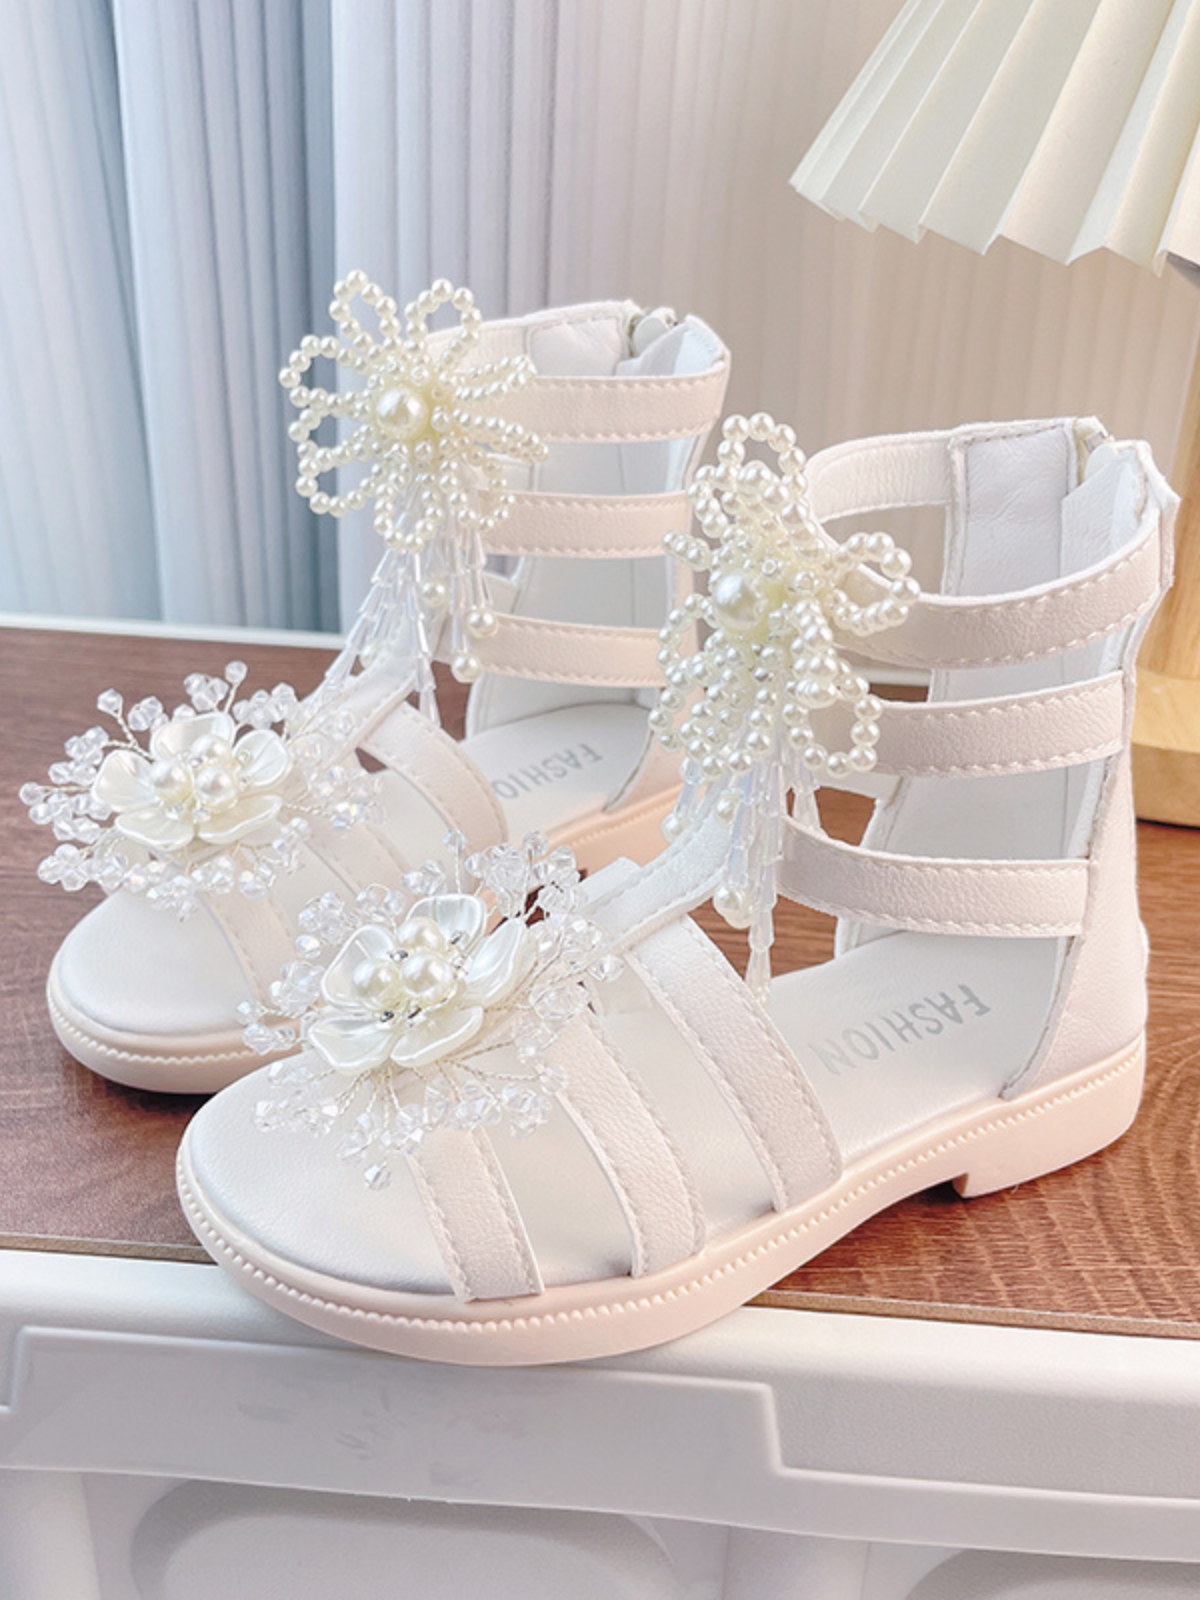 Toddler Shoes By Liv & Mia | Girls Pearled White Gladiator Sandals